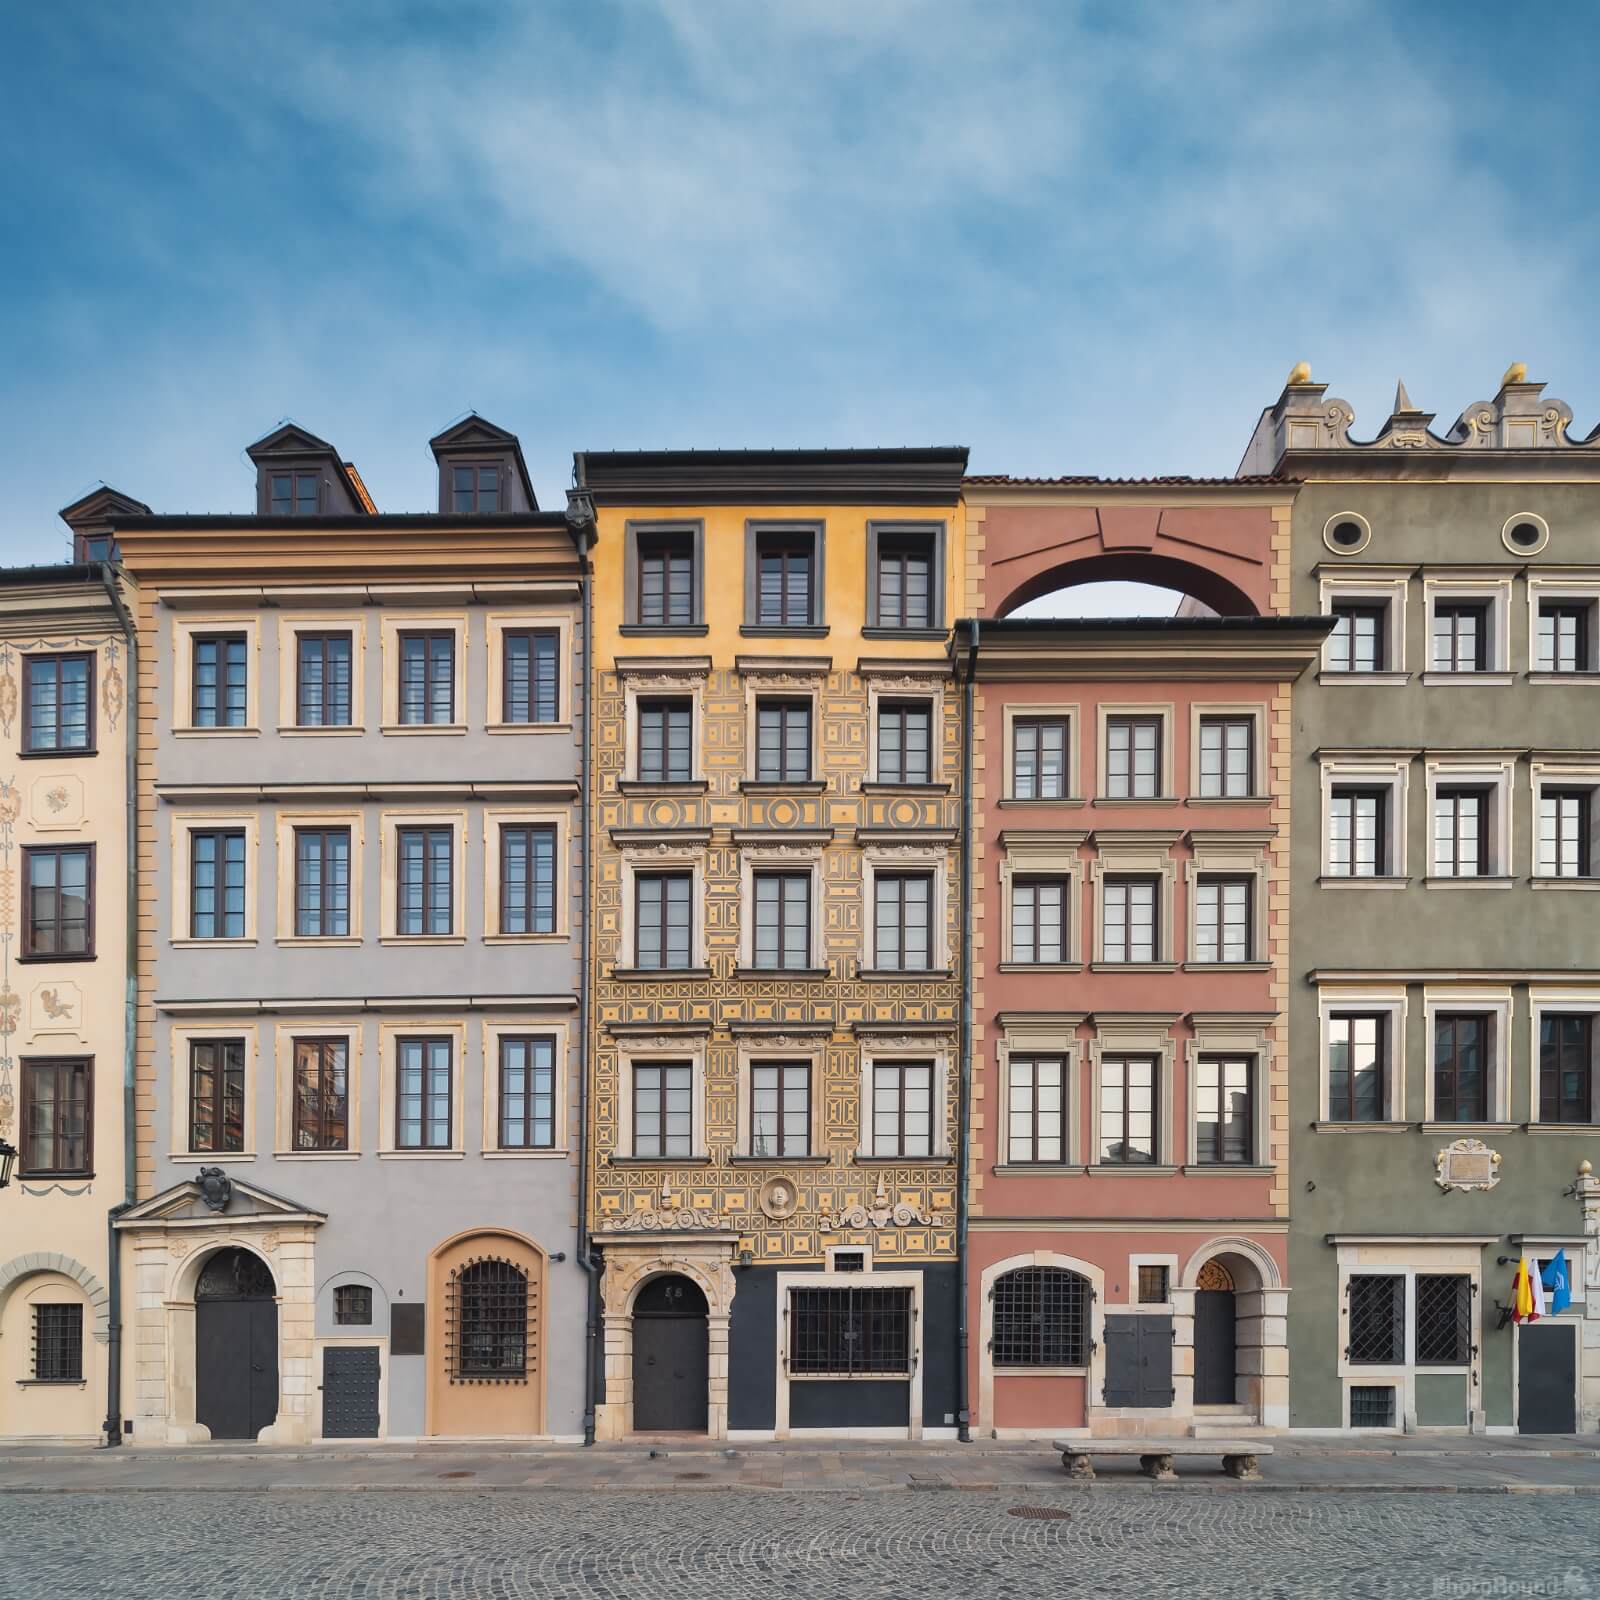 Image of Warsaw Old Town Square by Mathew Browne